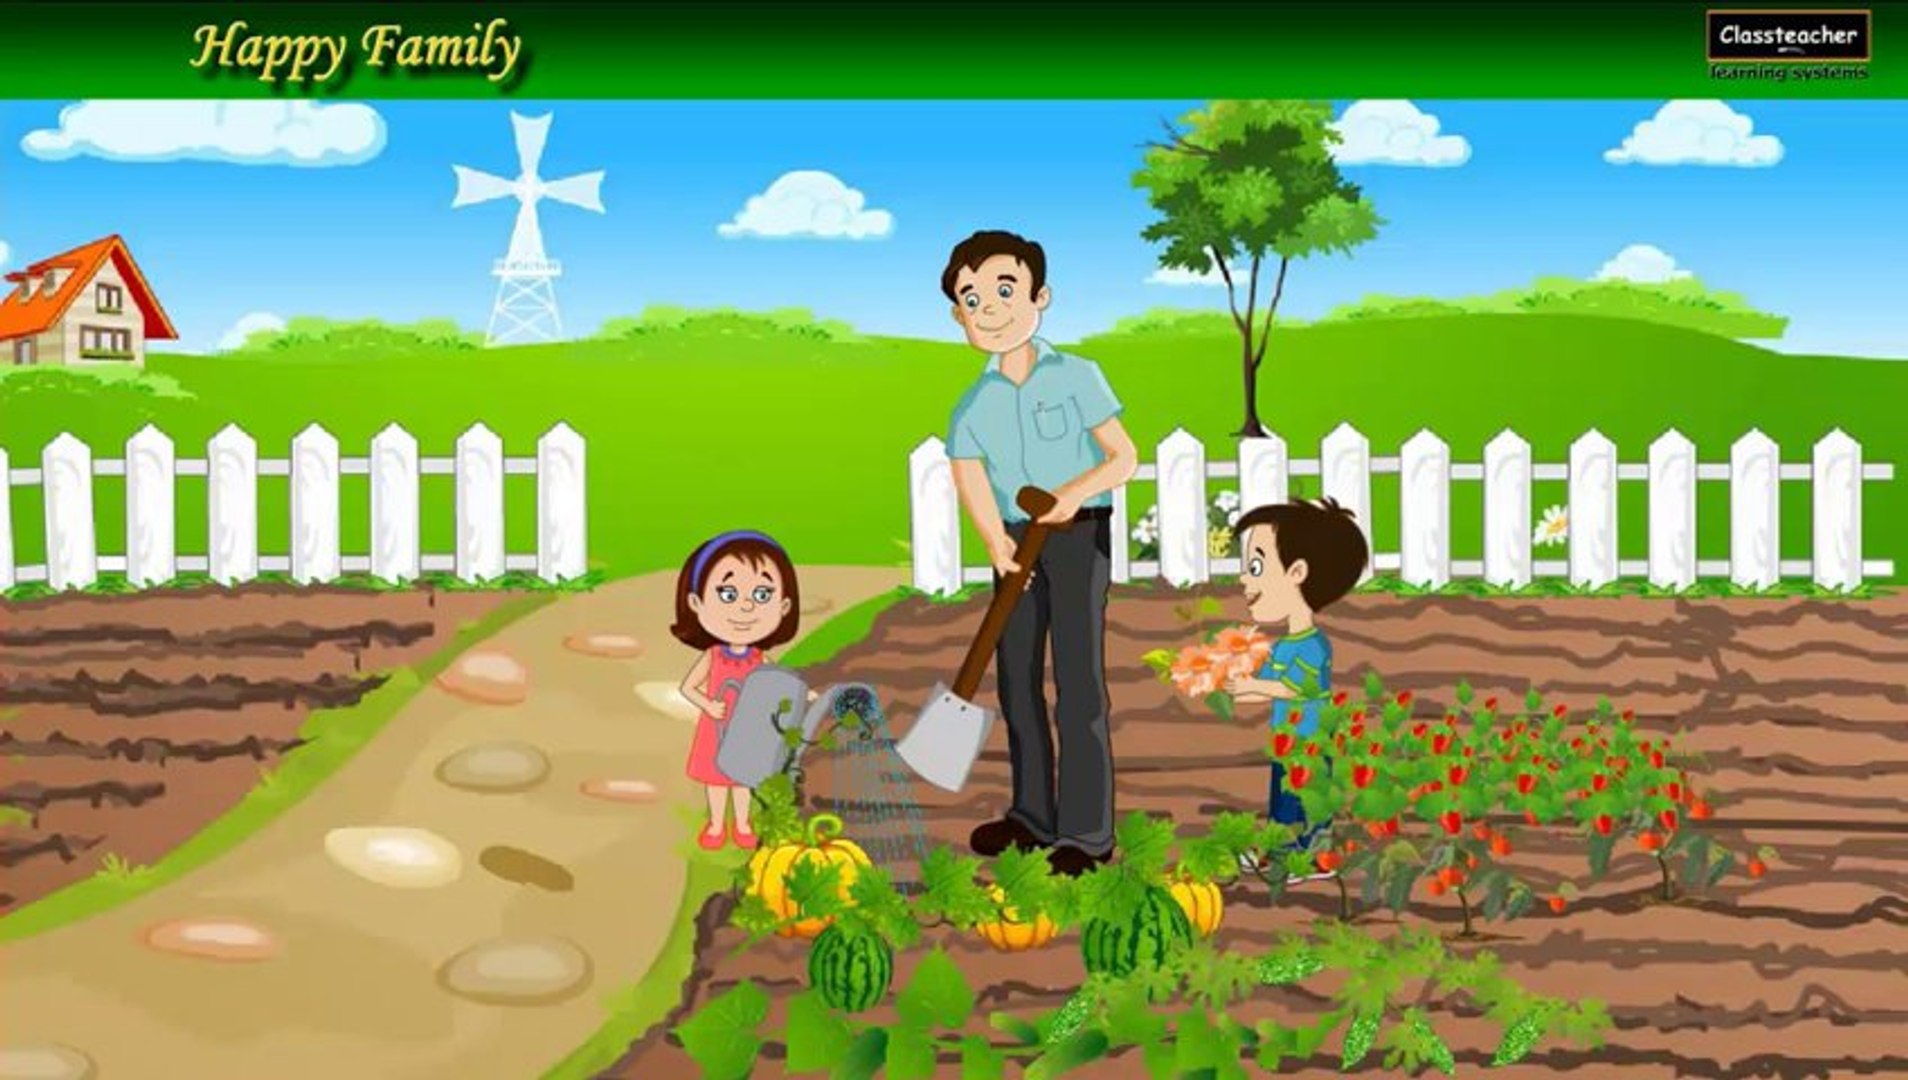 We are a Happy Family - Animated English Nursery Rhyme - video Dailymotion